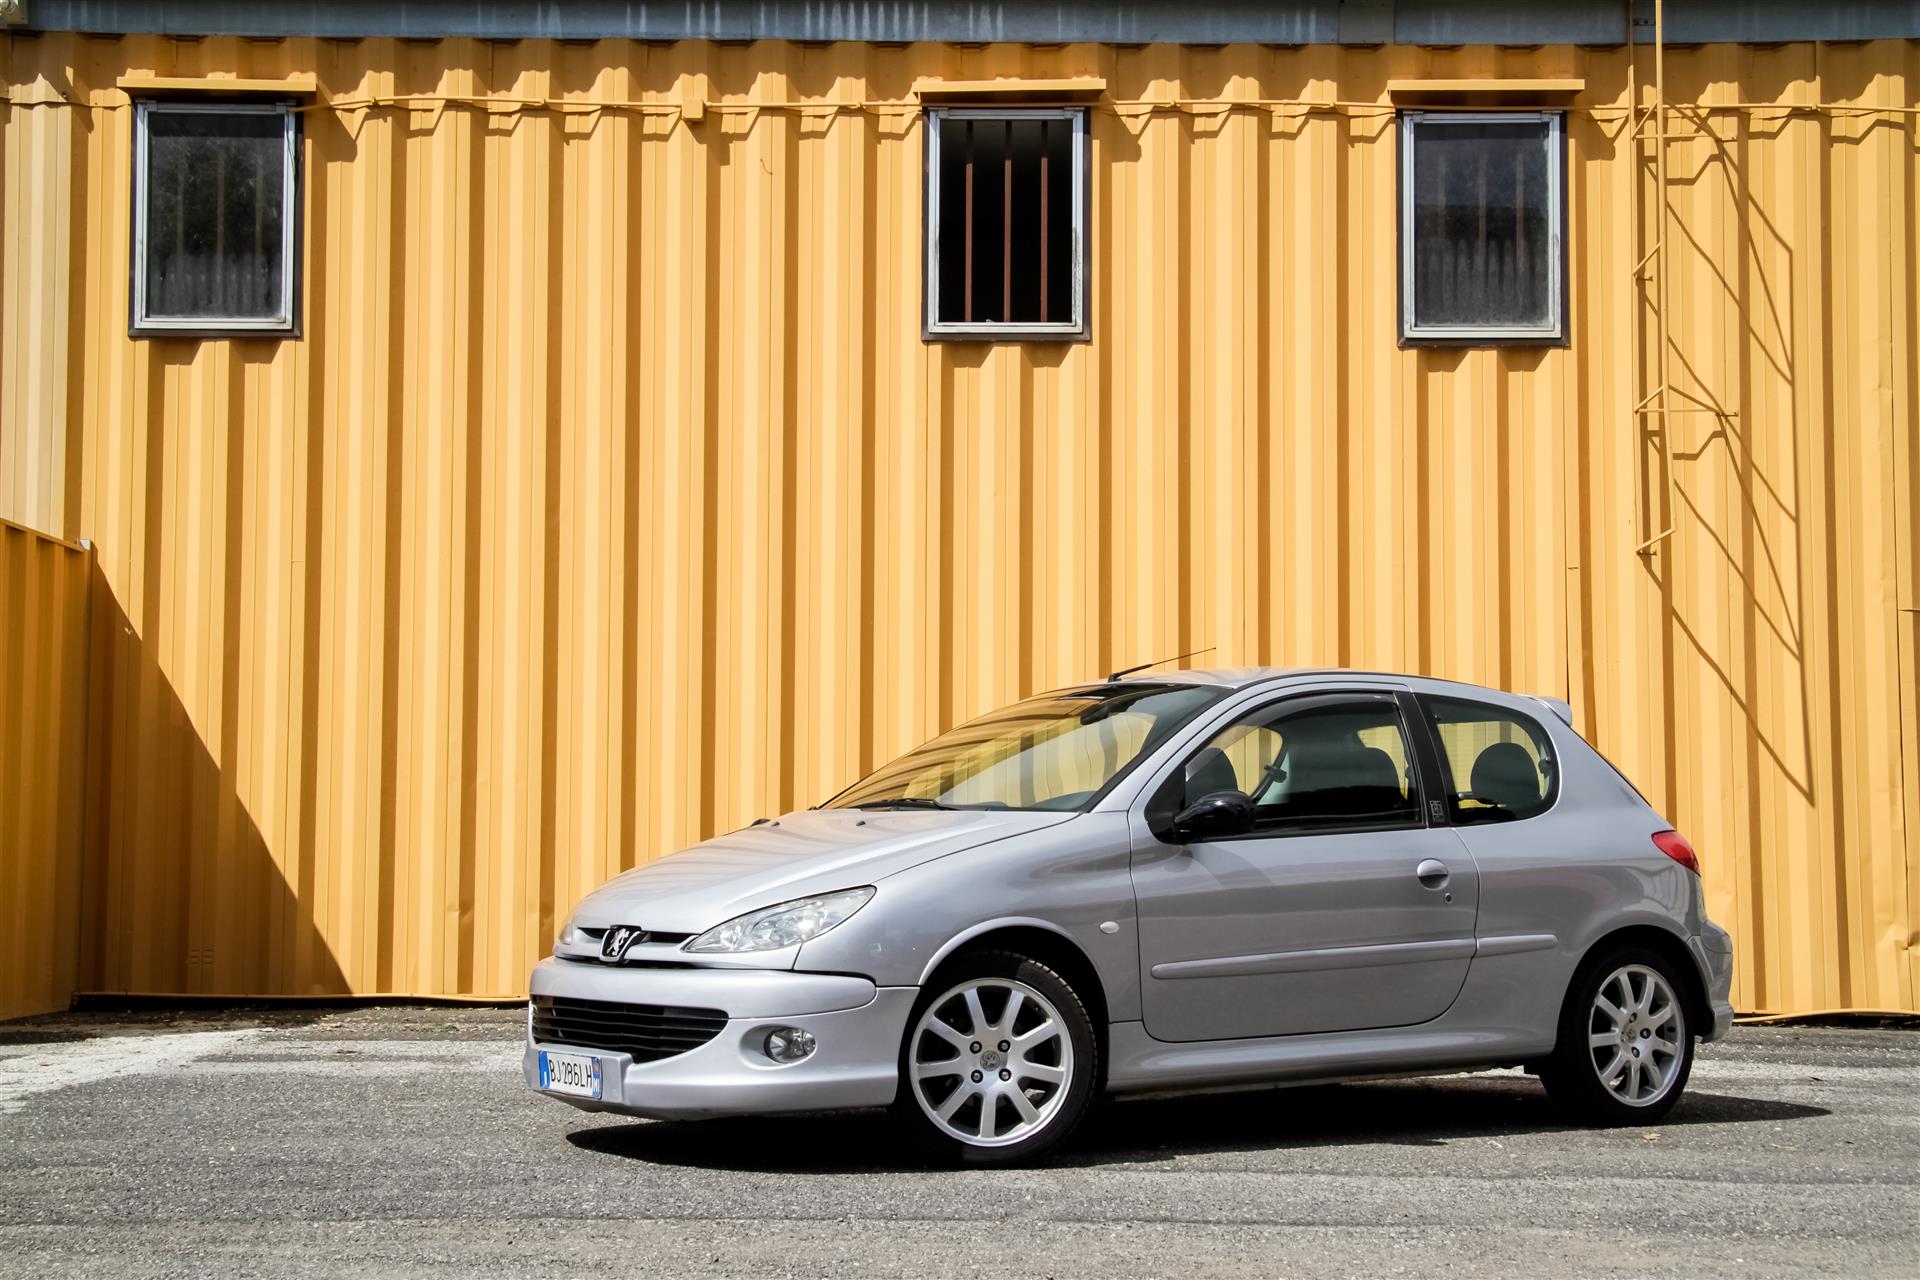 1998 Peugeot 206 Grand Tourisme Static Shot on a yellow industrial backdrop